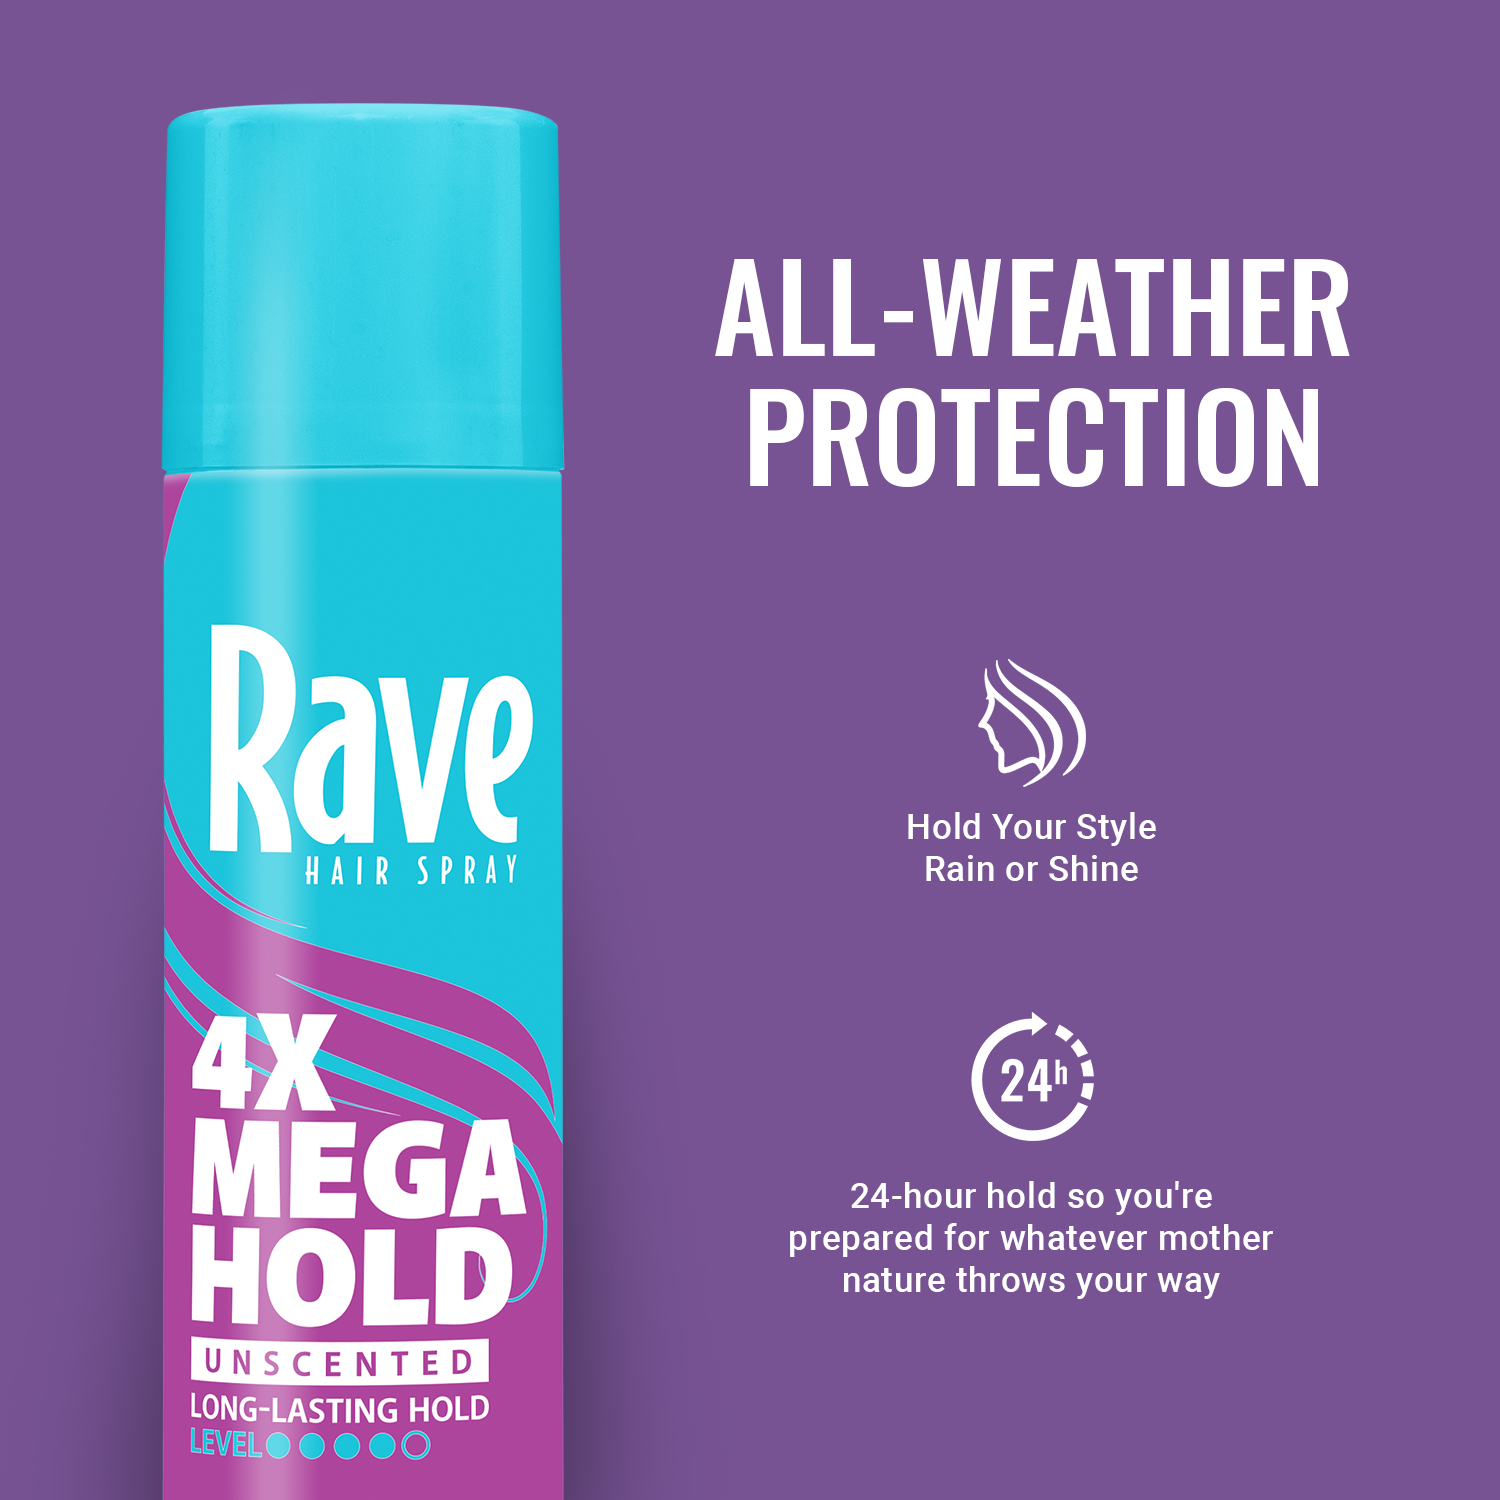 Rave 4X Mega Hold Hair Spray, All-Weather Protection with Vitamin-Rich Formula, 11 oz - image 5 of 8